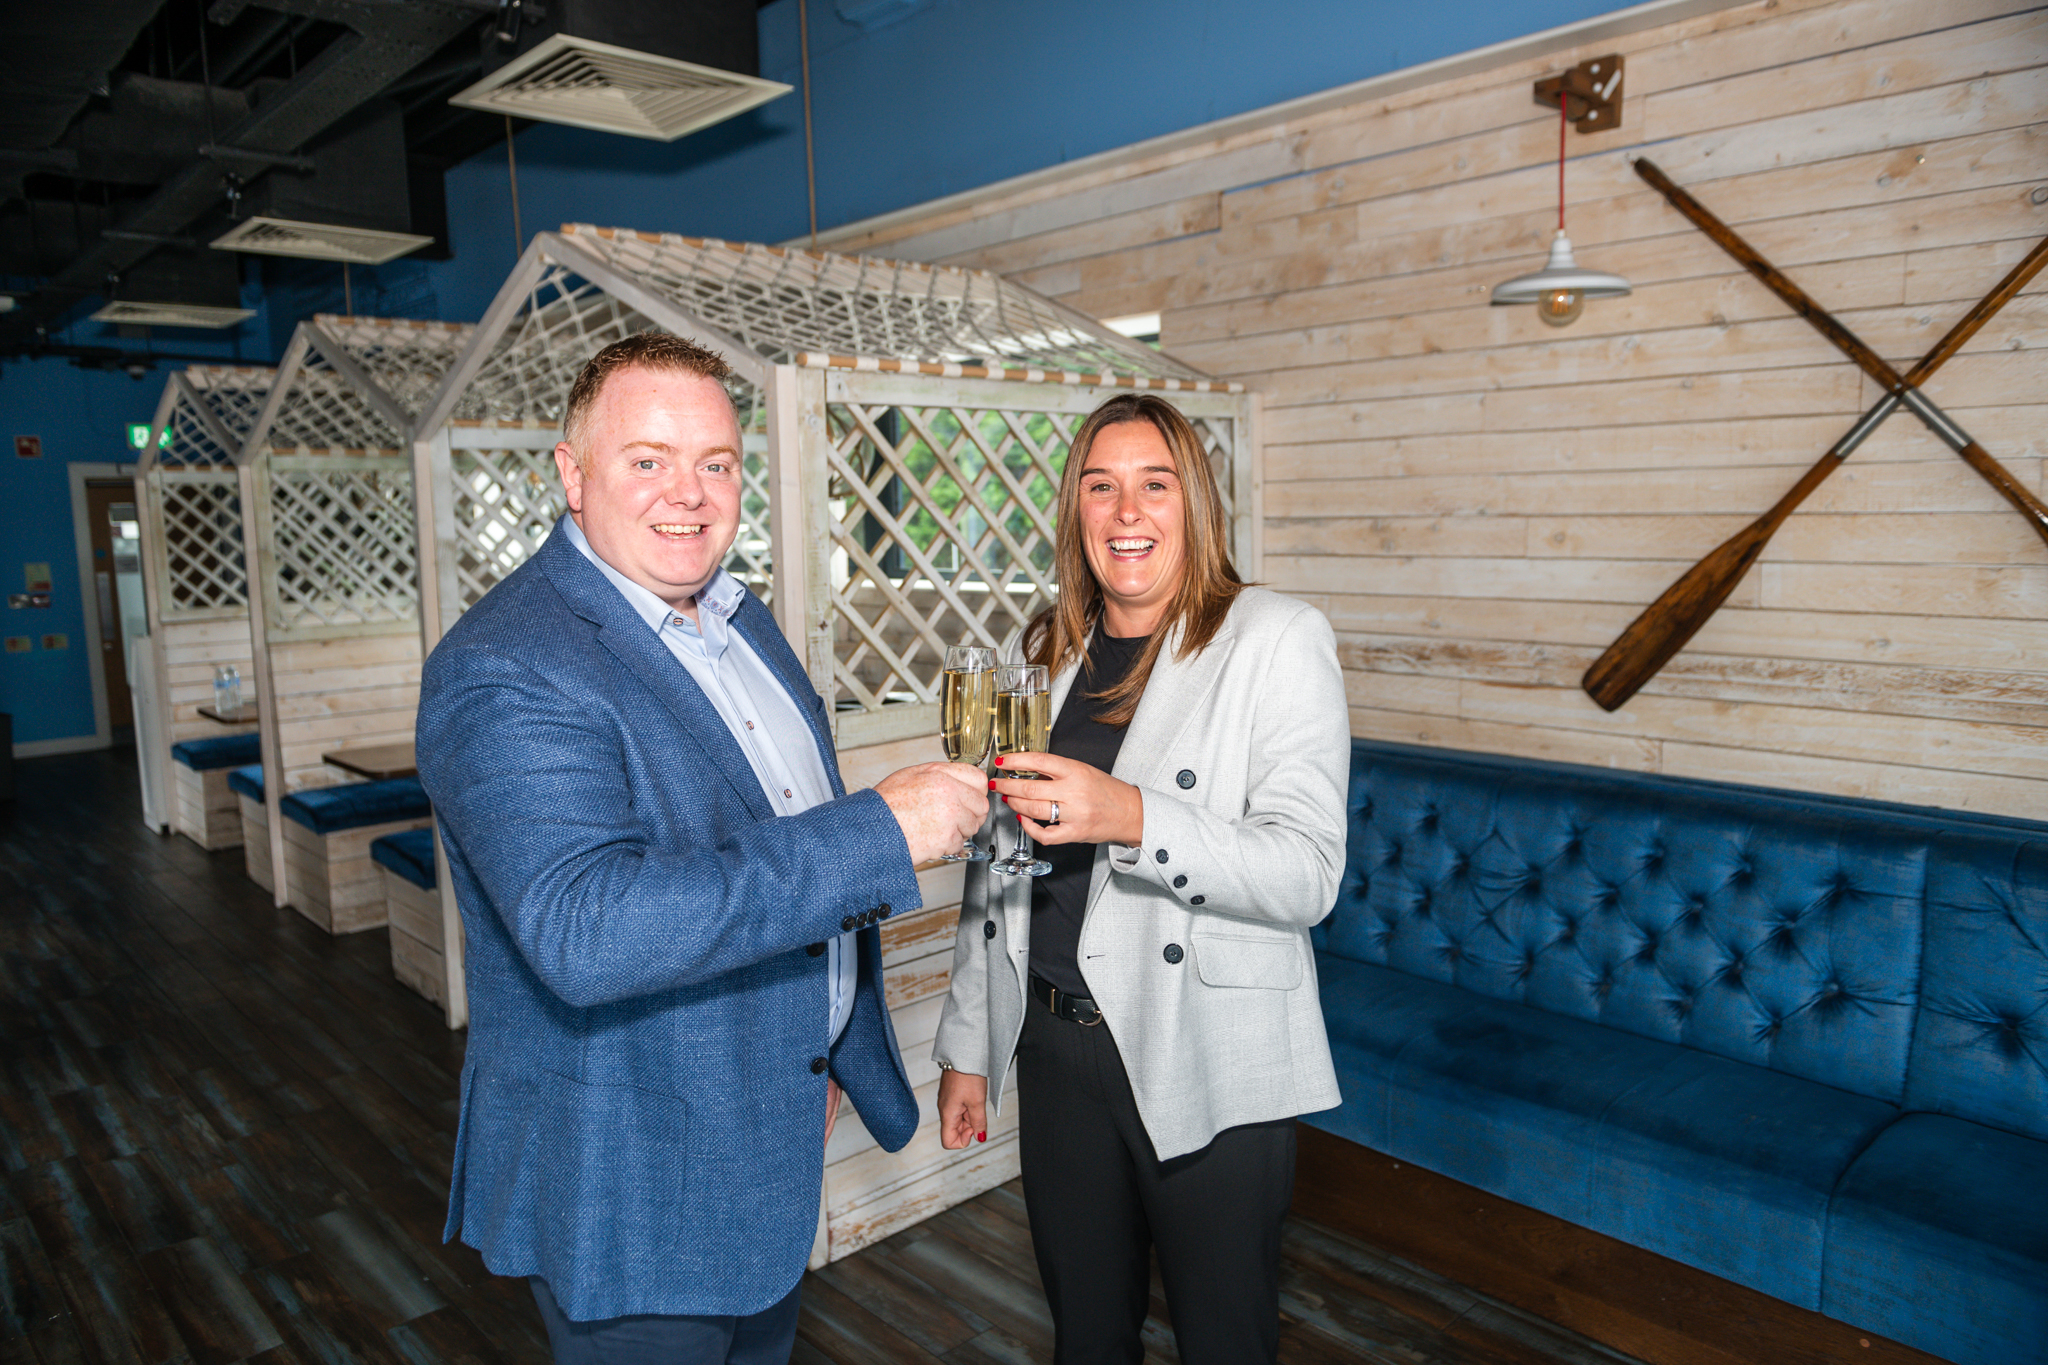 Boat House Restaurant charts new course